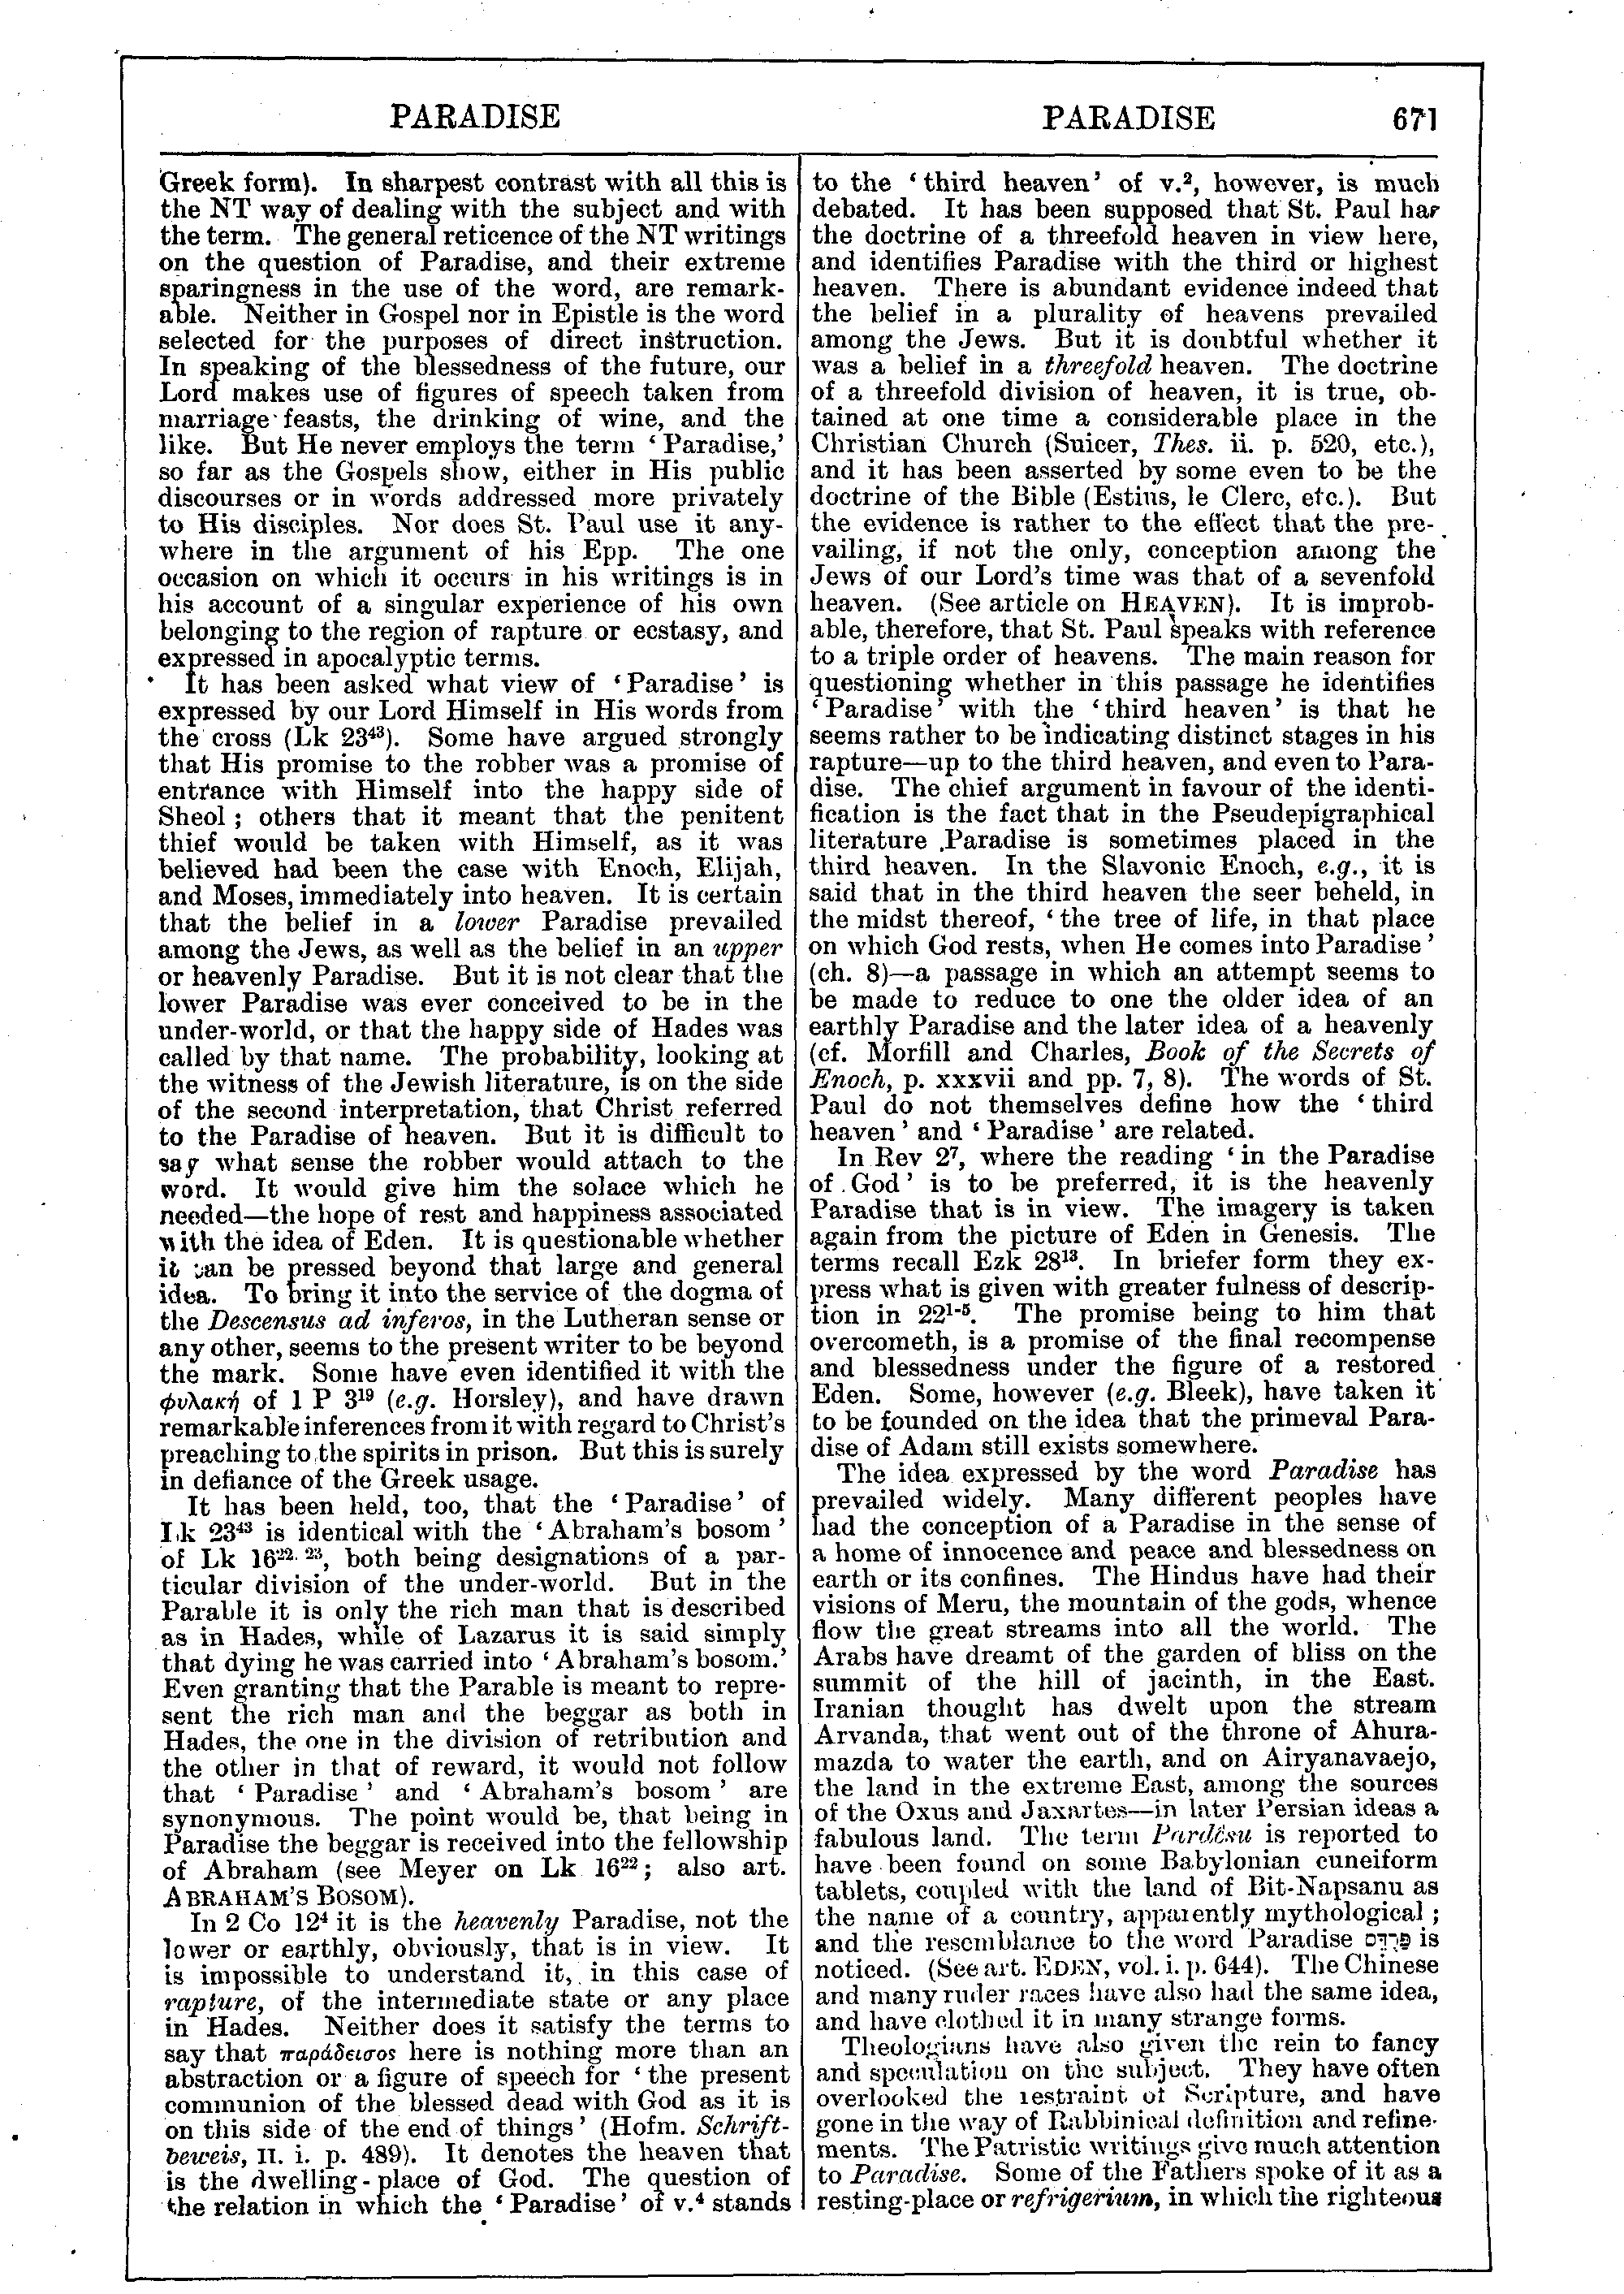 Image of page 671